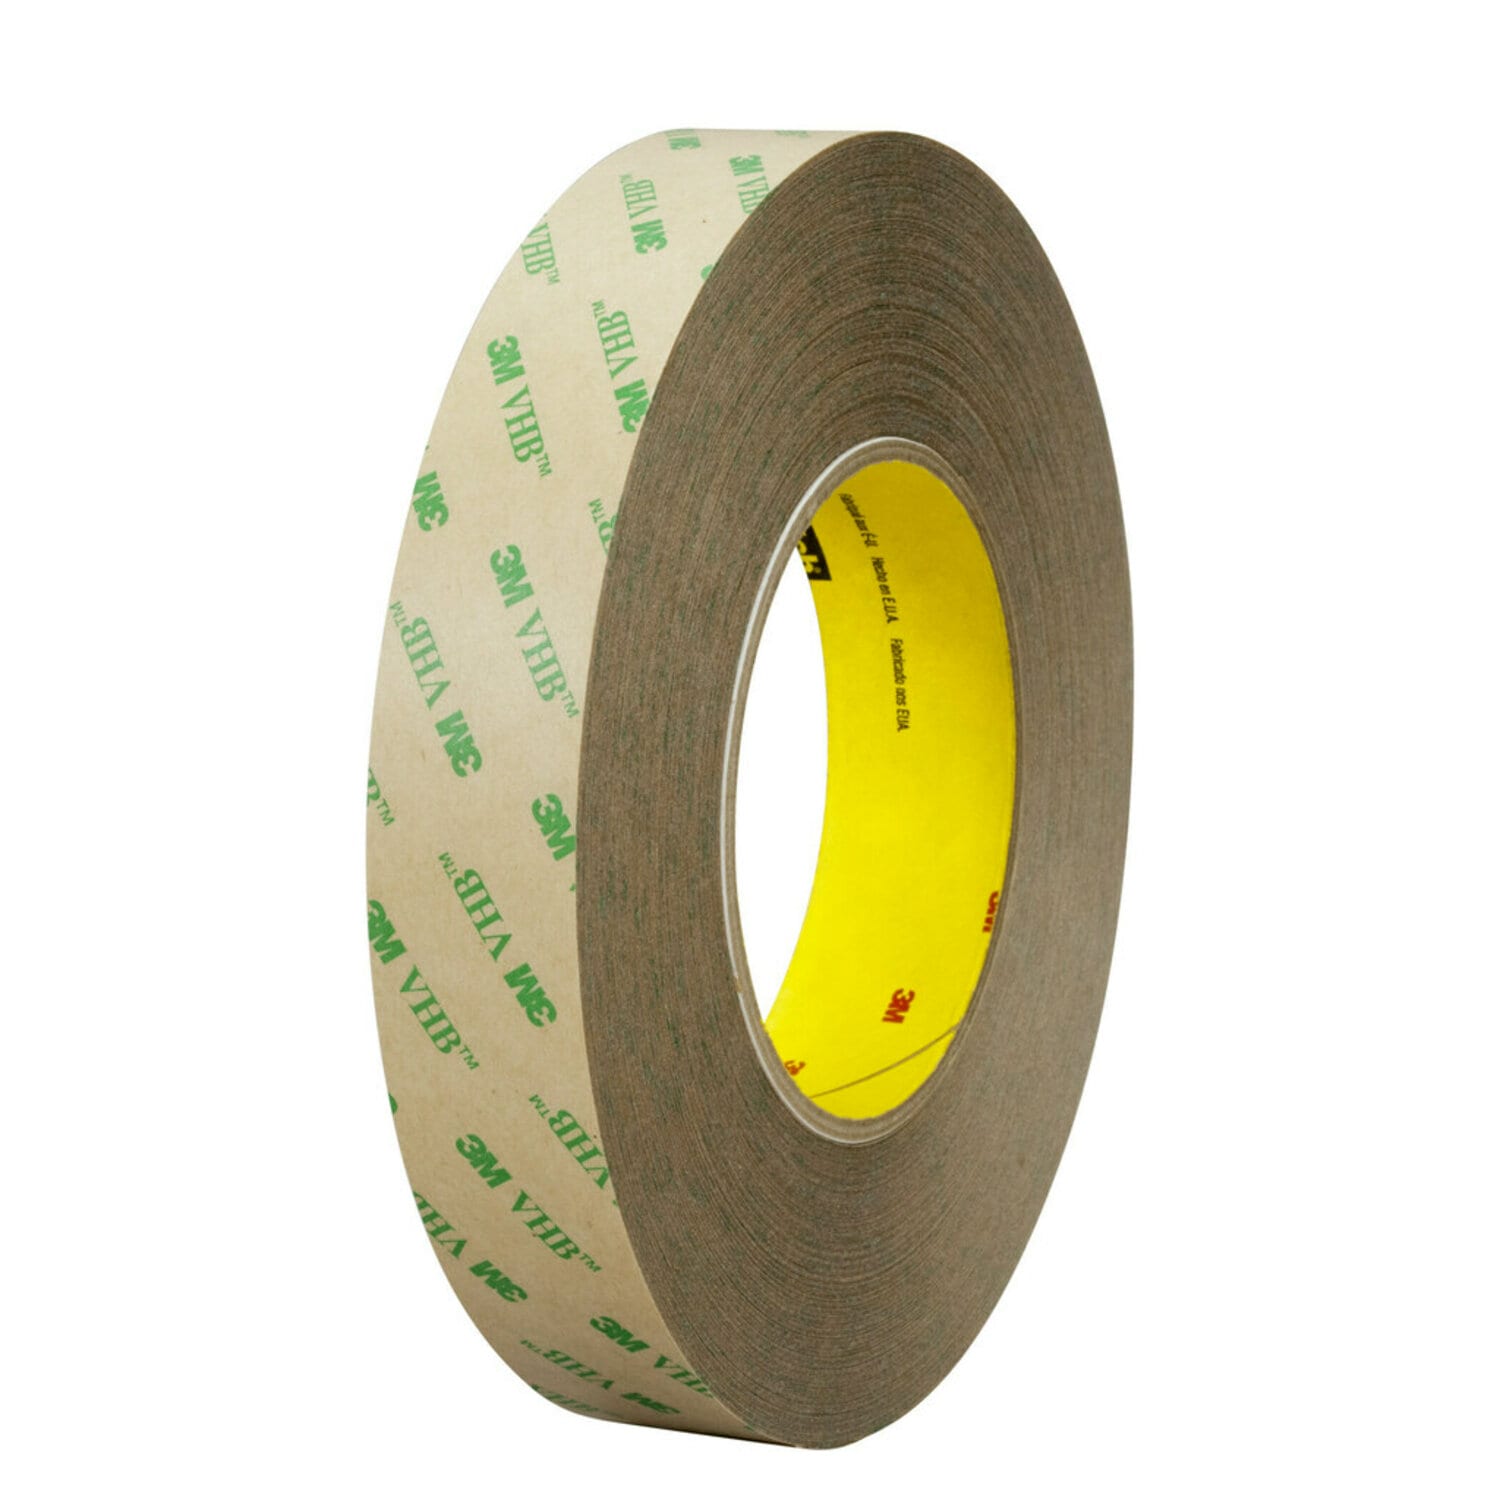 7010333942 - 3M VHB Adhesive Transfer Tape F9469PC, Clear, 18 in x 60 yd, 5 Mil,
1/Case